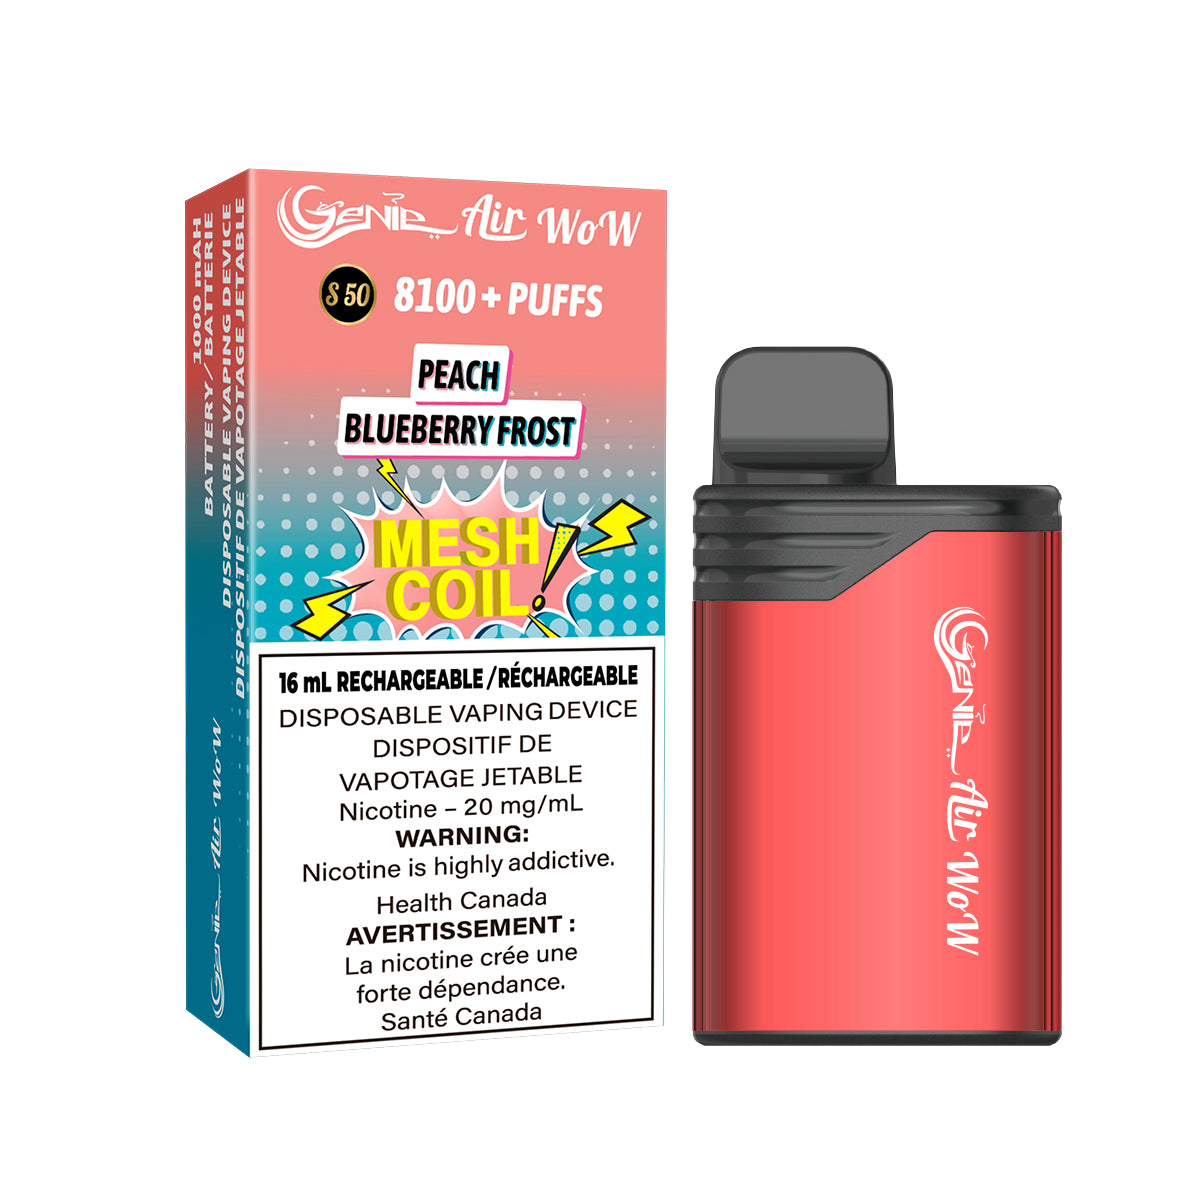 GENIE AIR WOW - peach blueberry  FROST 8100 Puffs  20 mg / mL Salt Nicotine  Juice Capacity: 16 mL  Battery: 1000 mAh Rechargeable   Mesh Coil Technology    s50